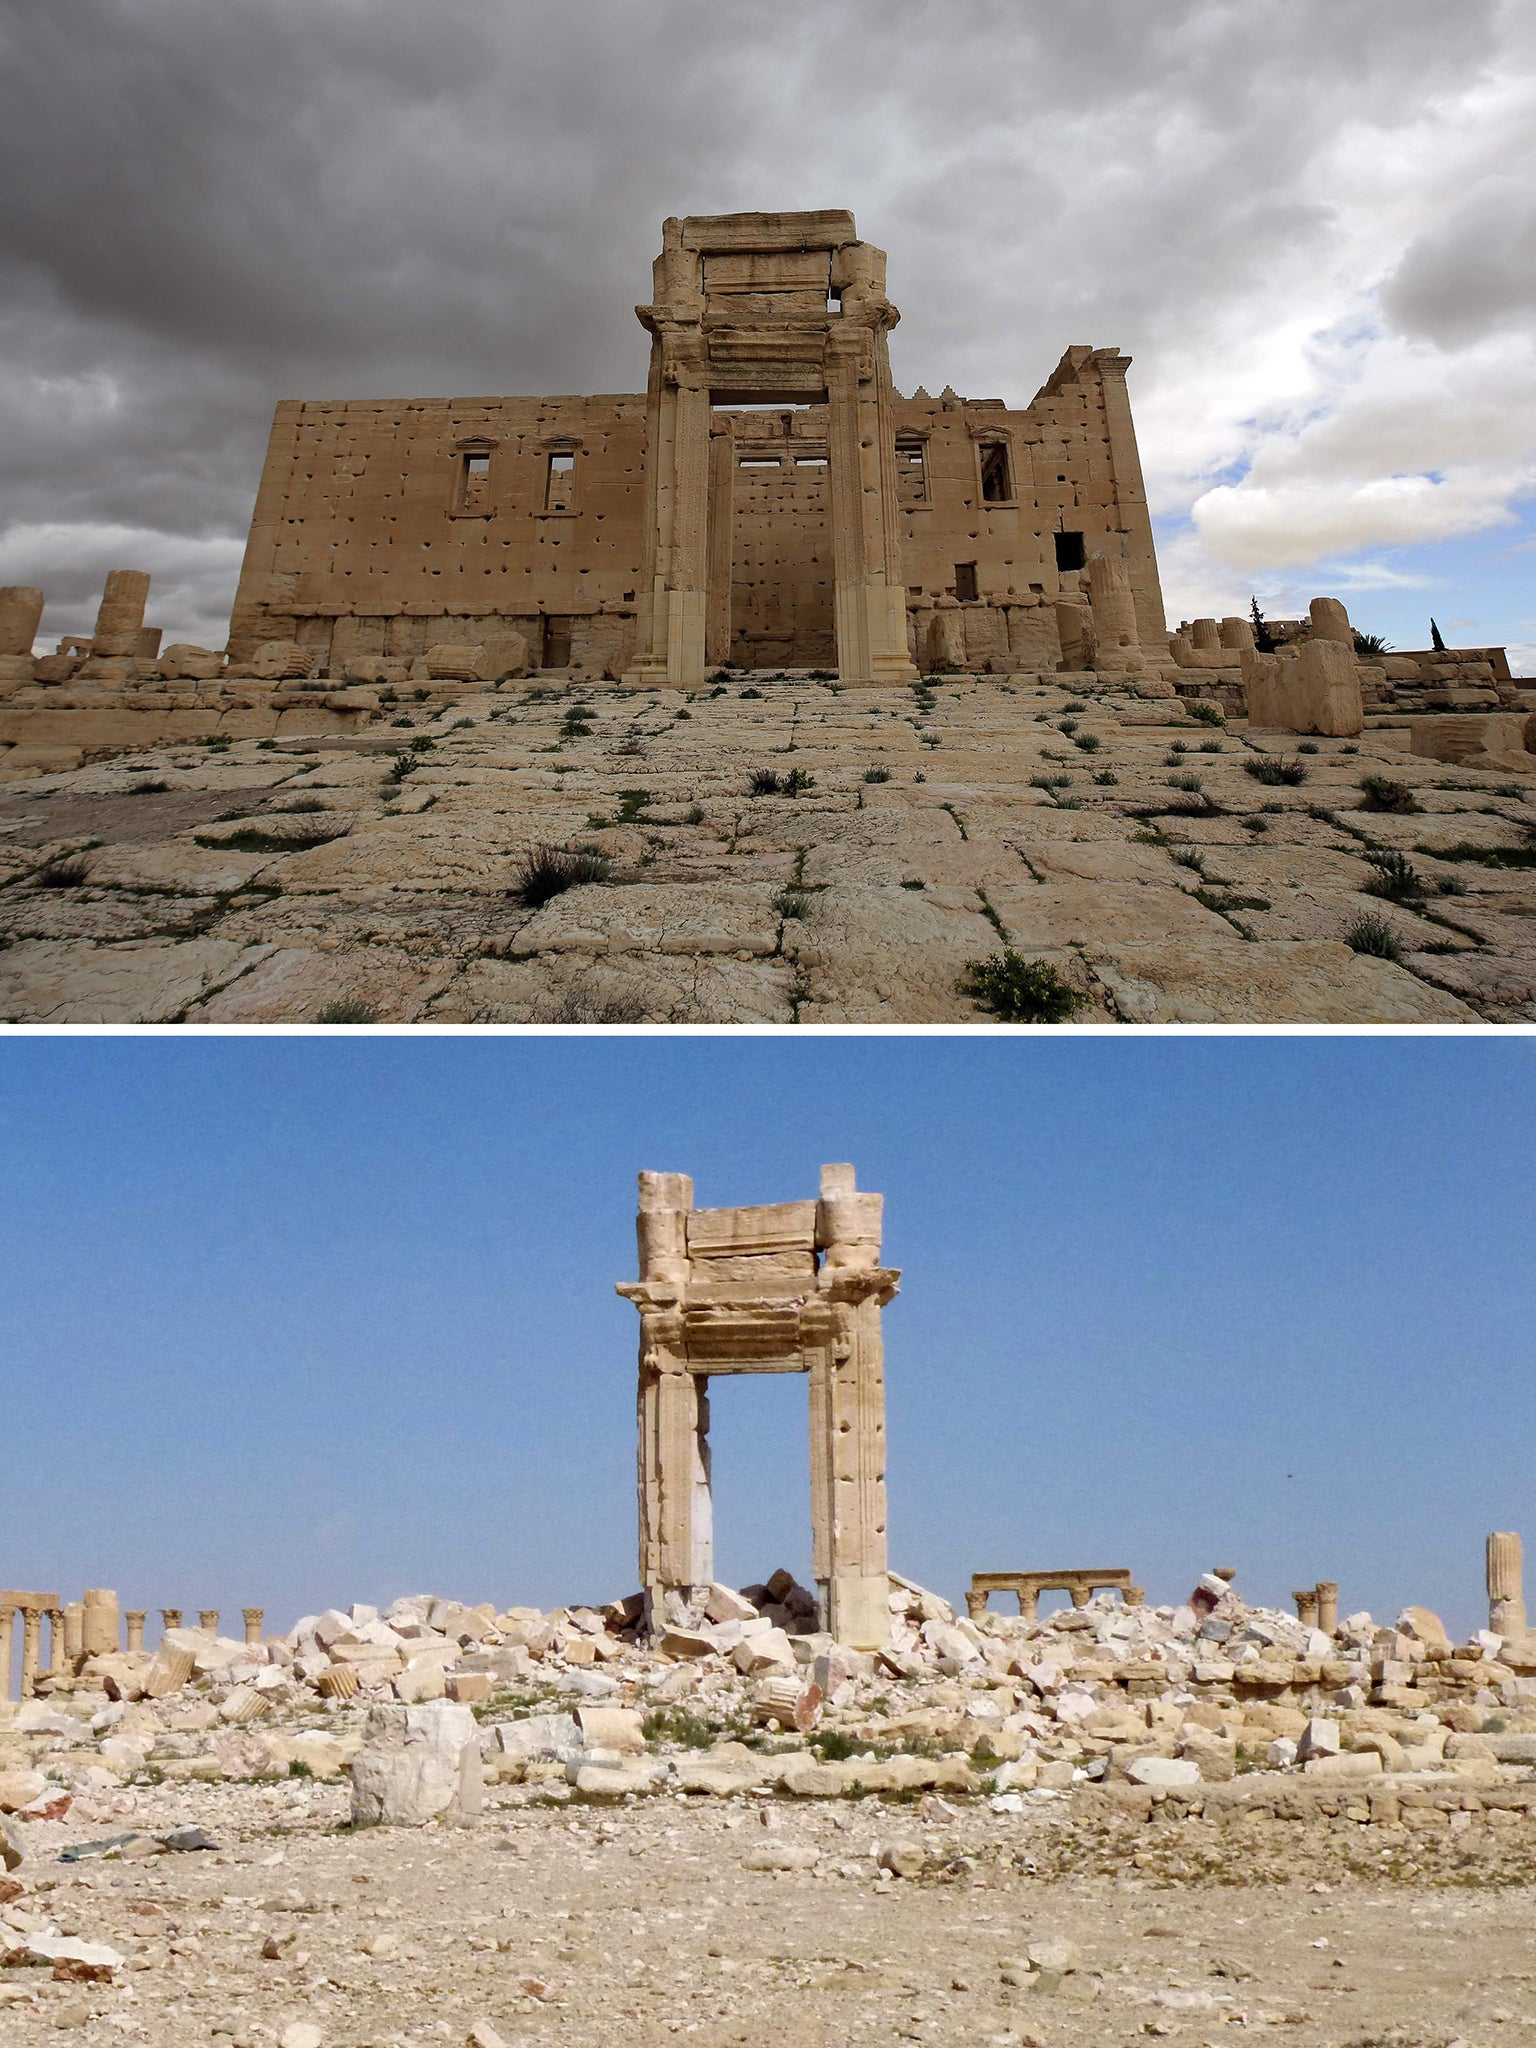 The iconic Temple of Bel prior to being blown up by Islamic State (IS) group jihadists in September 2015 and the remains of the temple after Syrian troops recaptured the ancient site